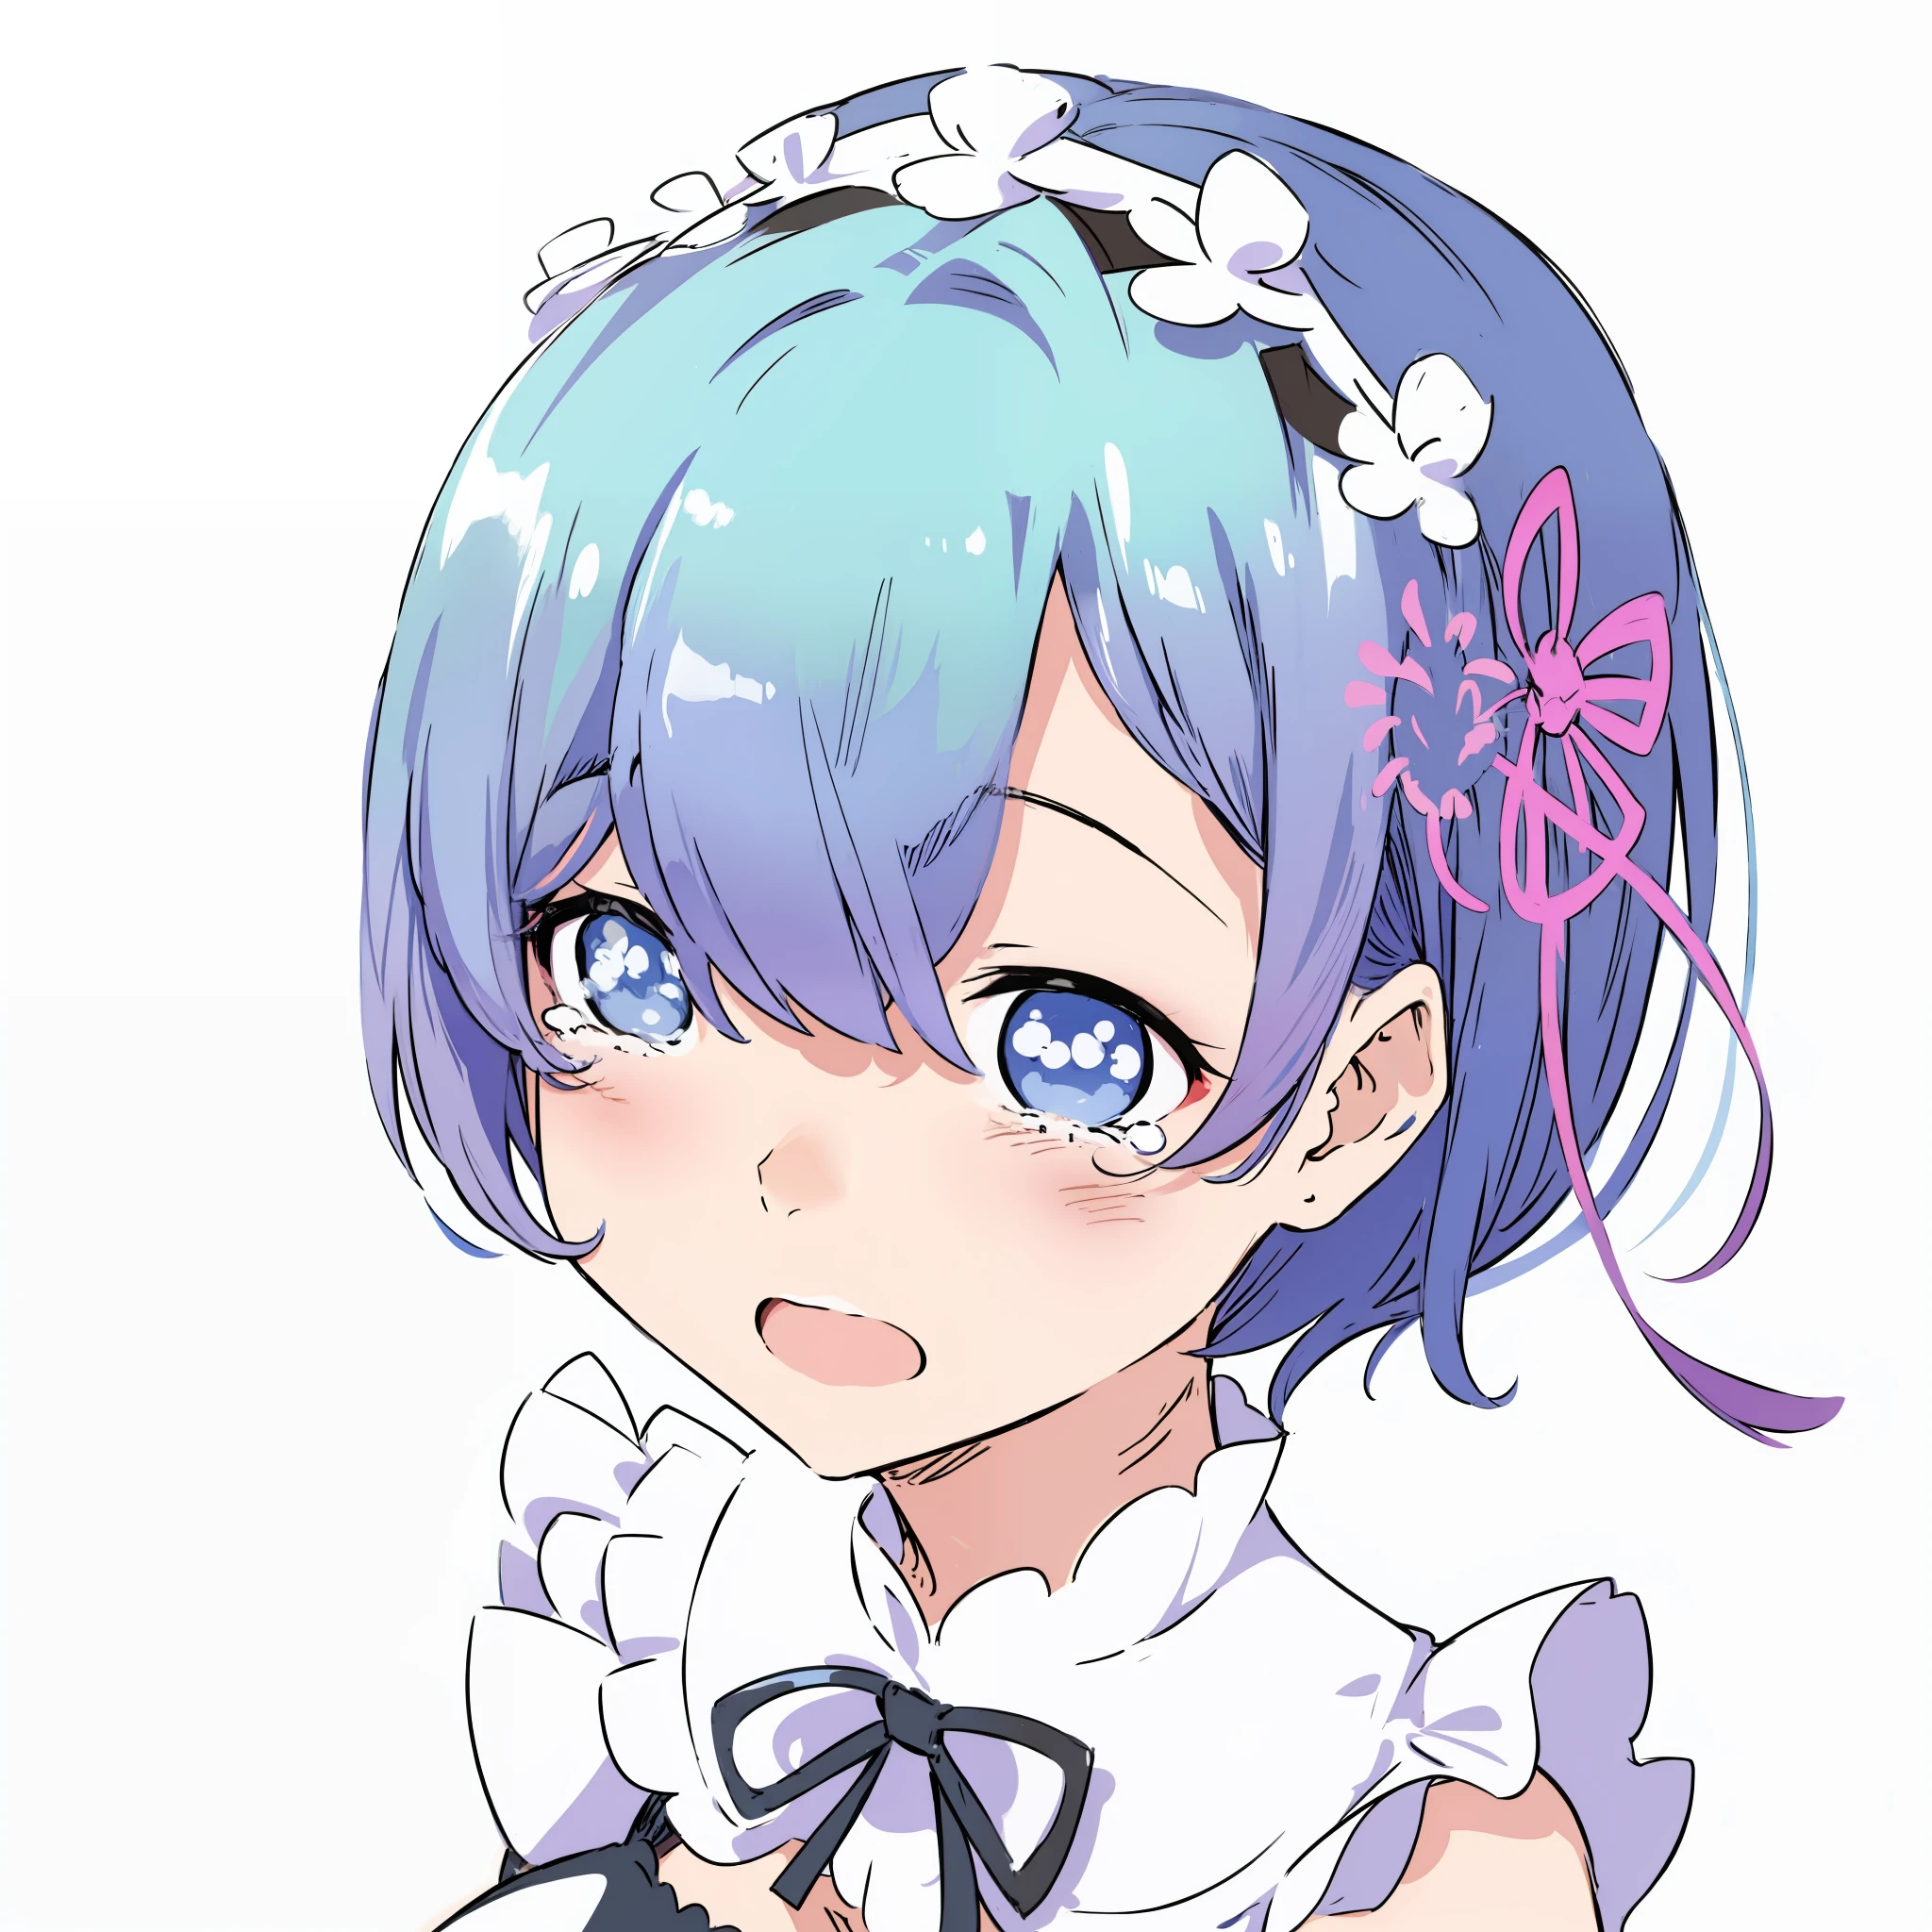 blue hair, big , maid dress, rem from re:zero, crying, open mouth